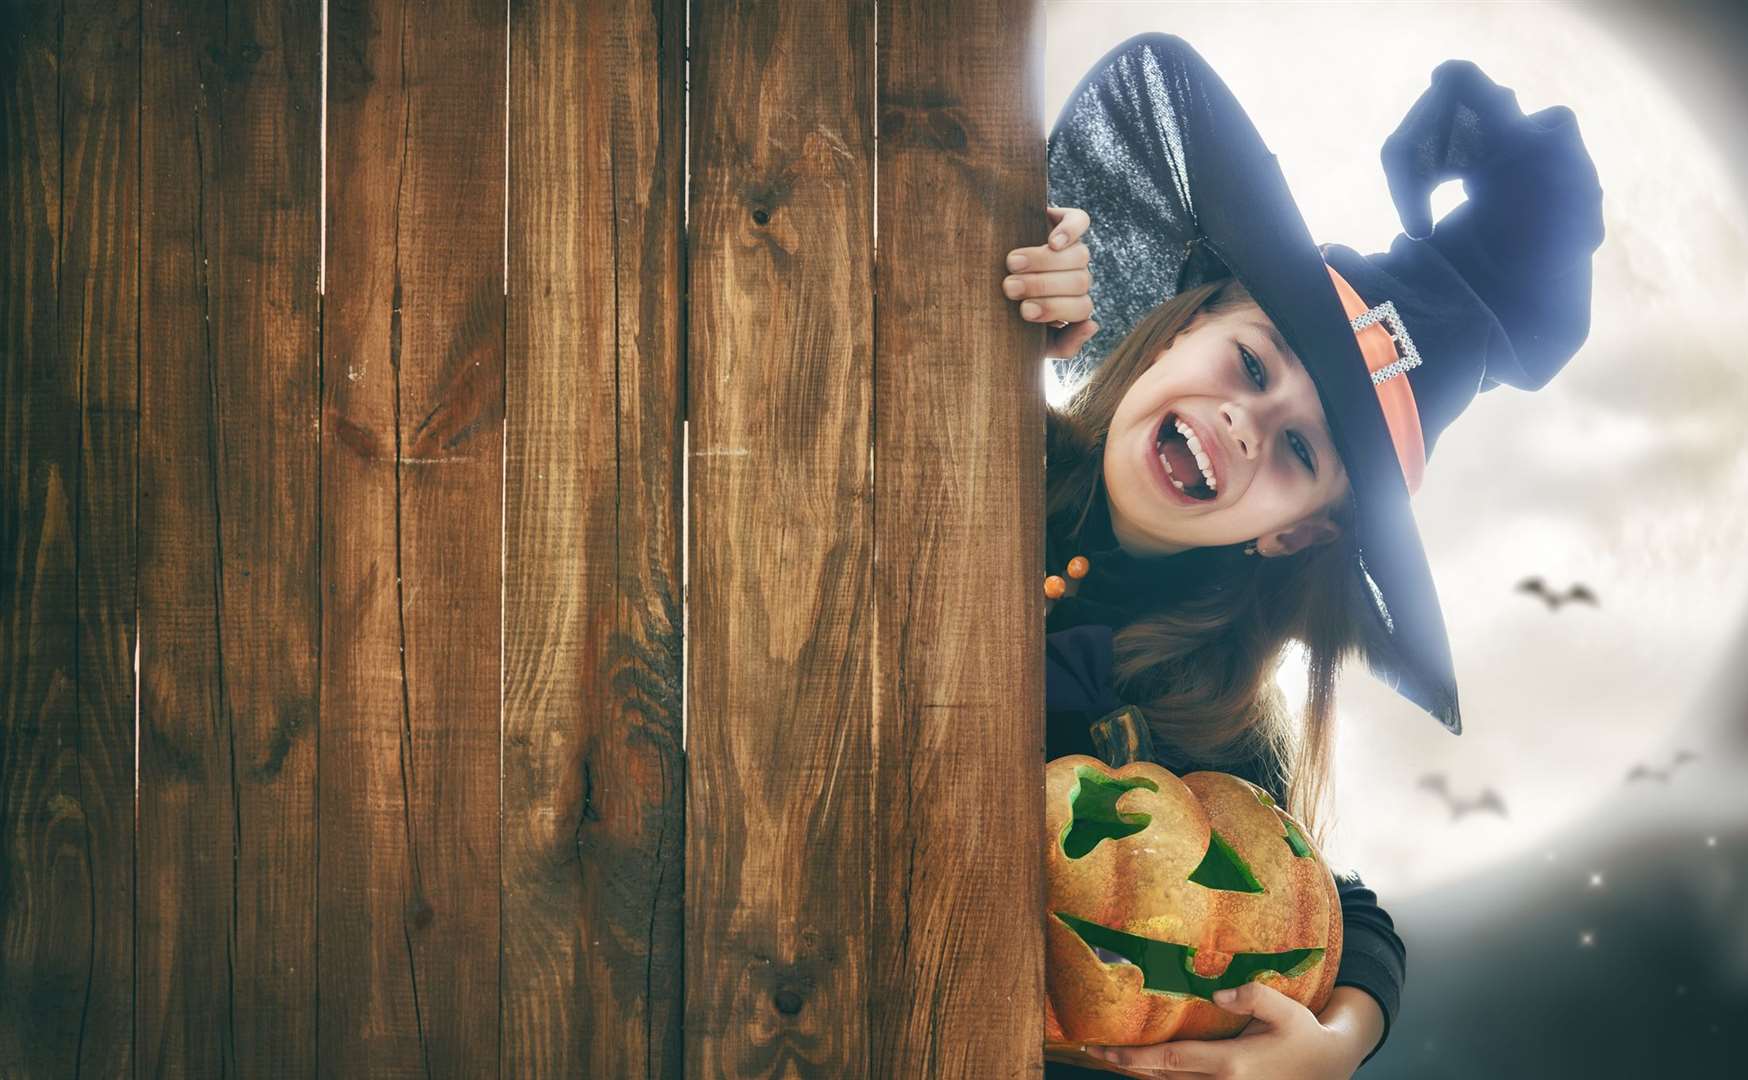 Keep safe when out trick or treating this Halloween